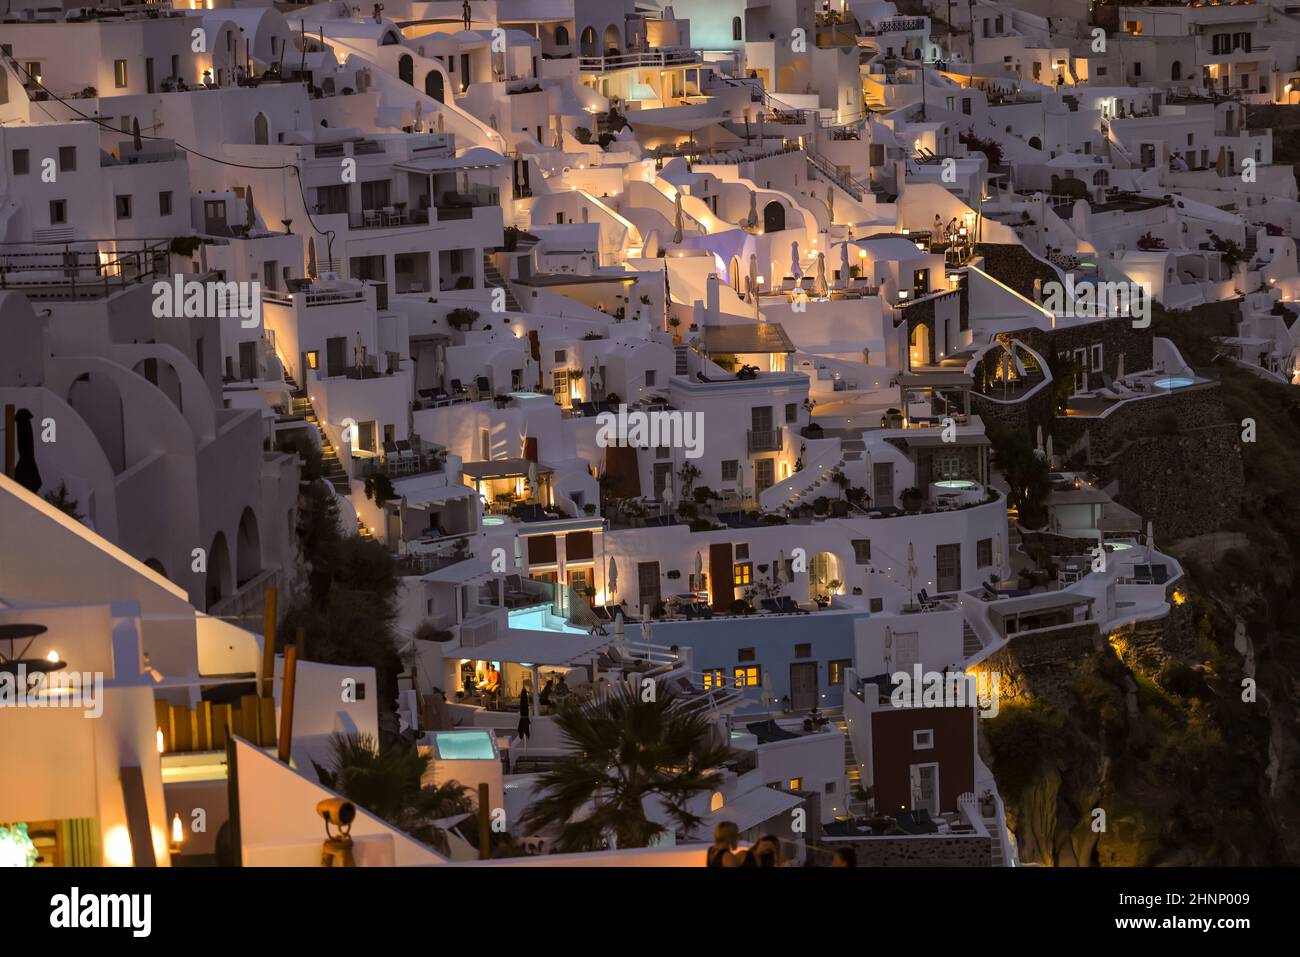 Illuminated whitewashed houses with terraces and pools and a beautiful view in Imerovigli on Santorini island Stock Photo